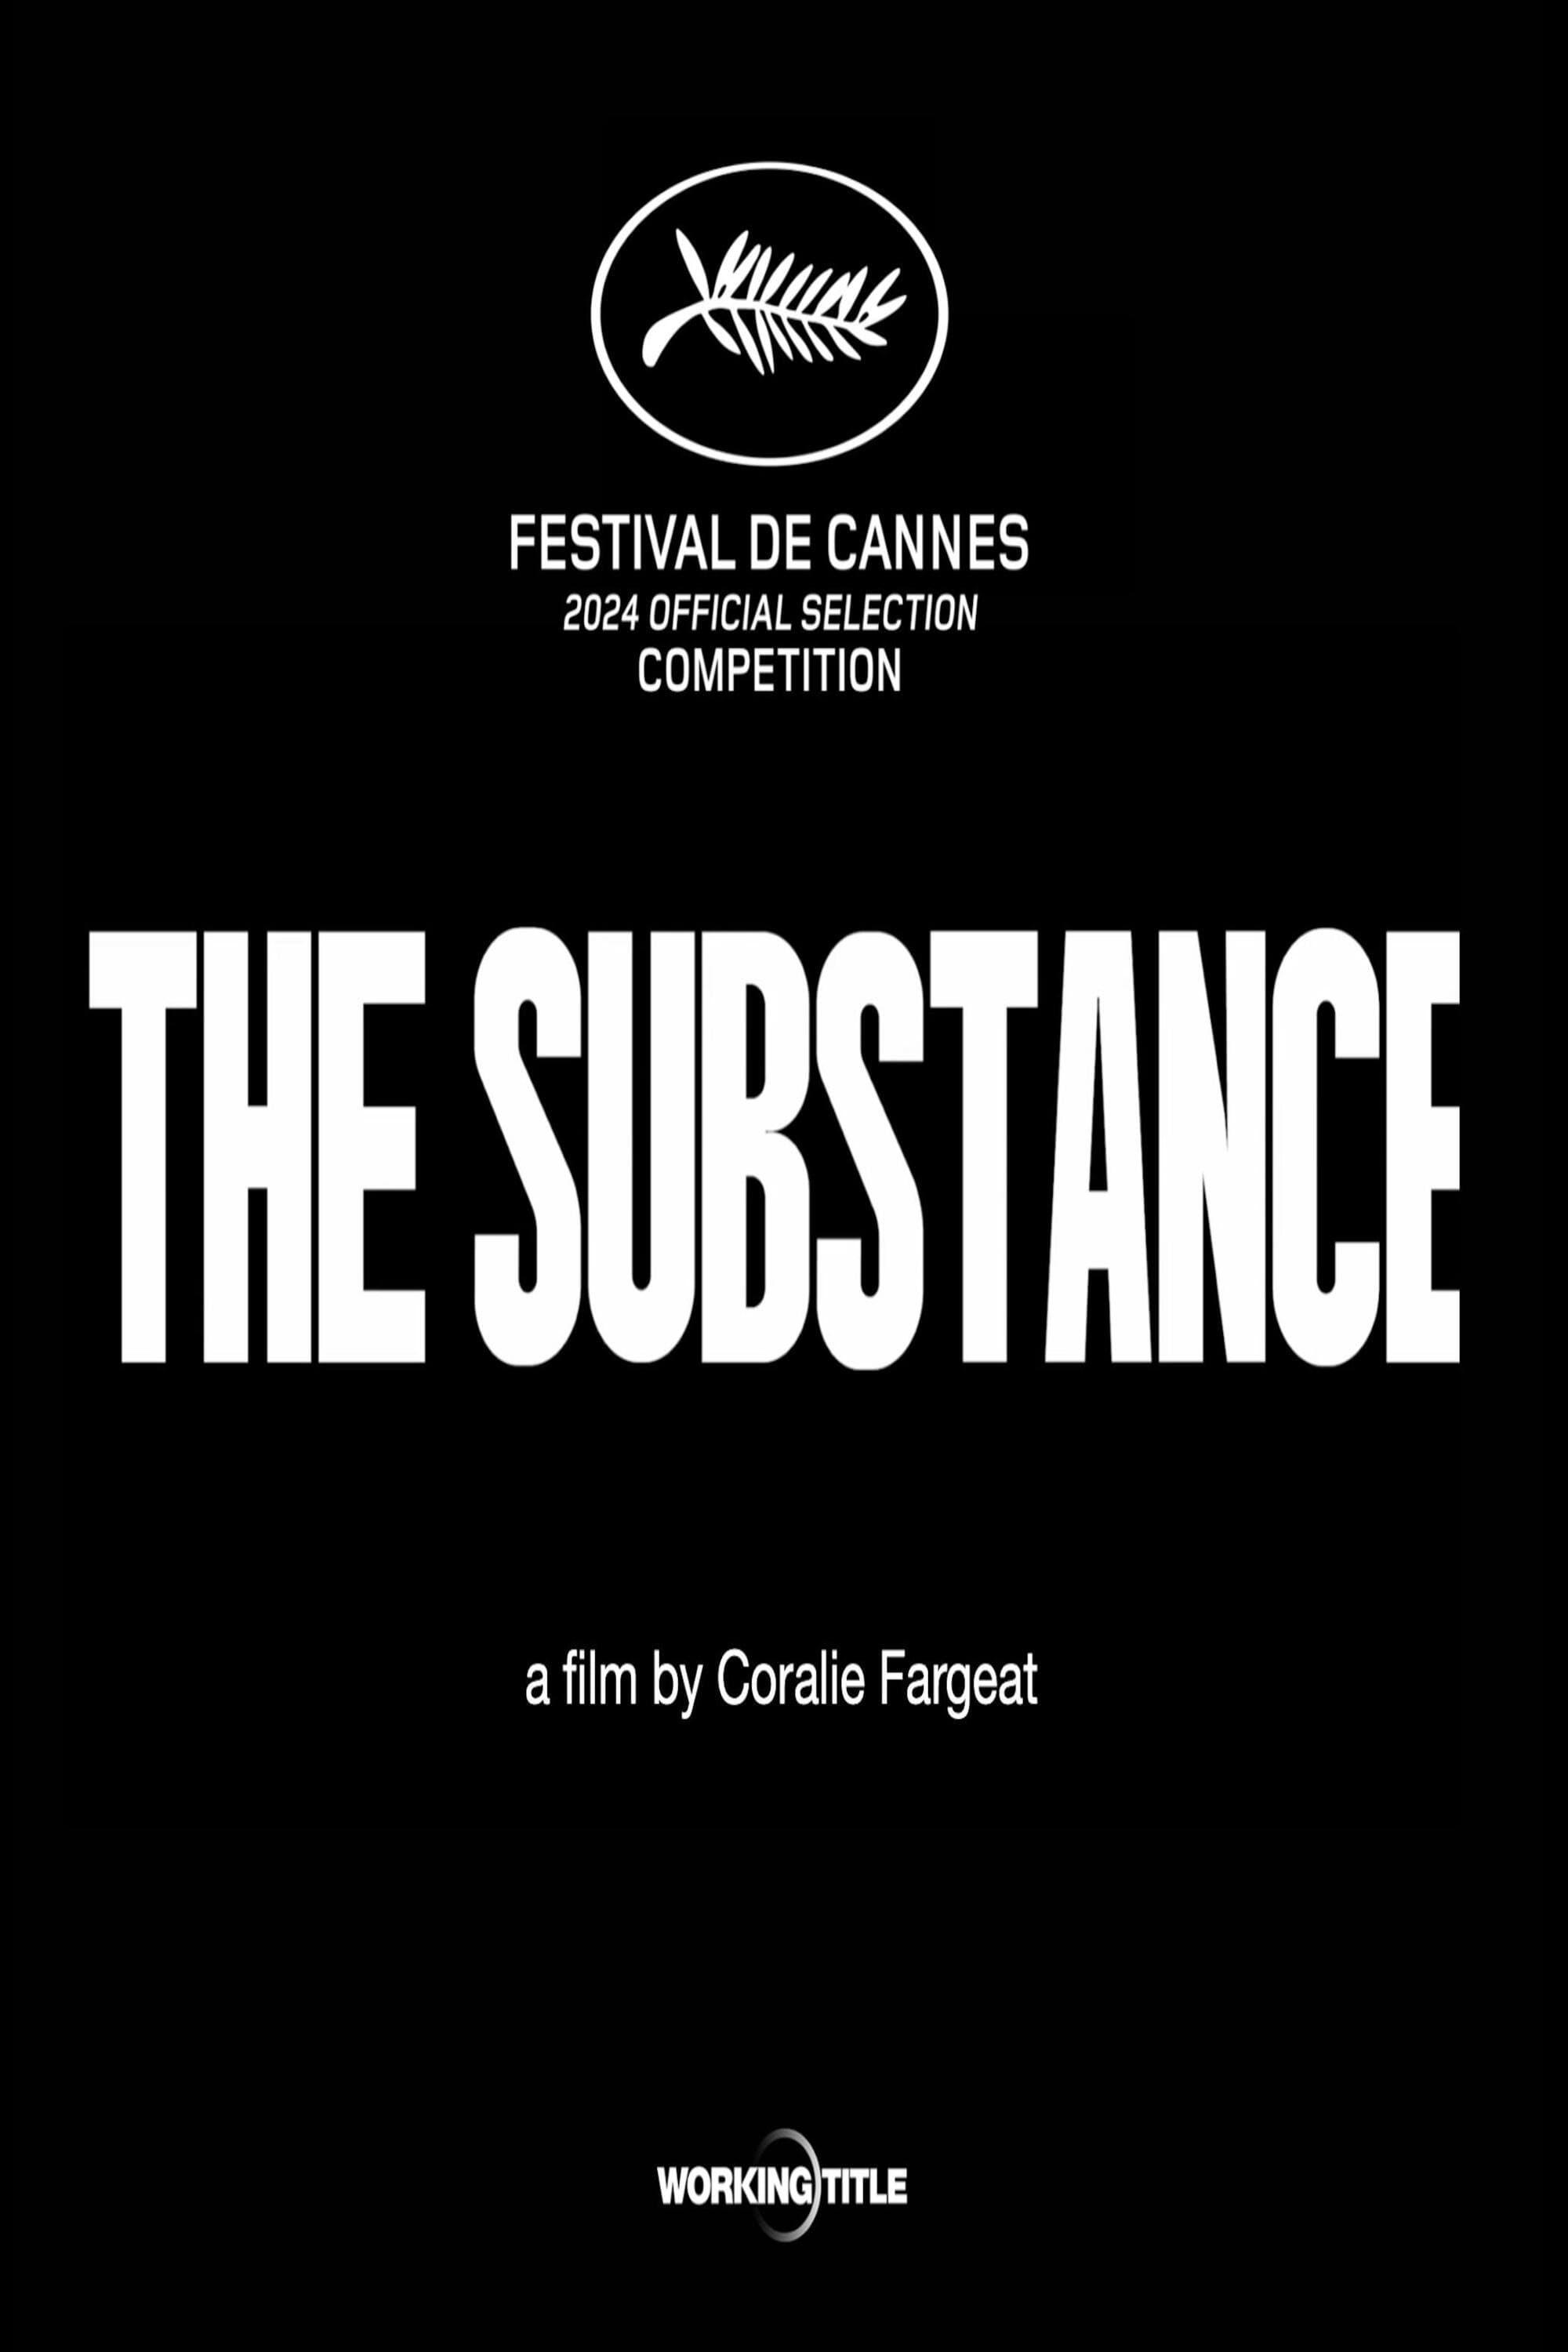 The Substance poster